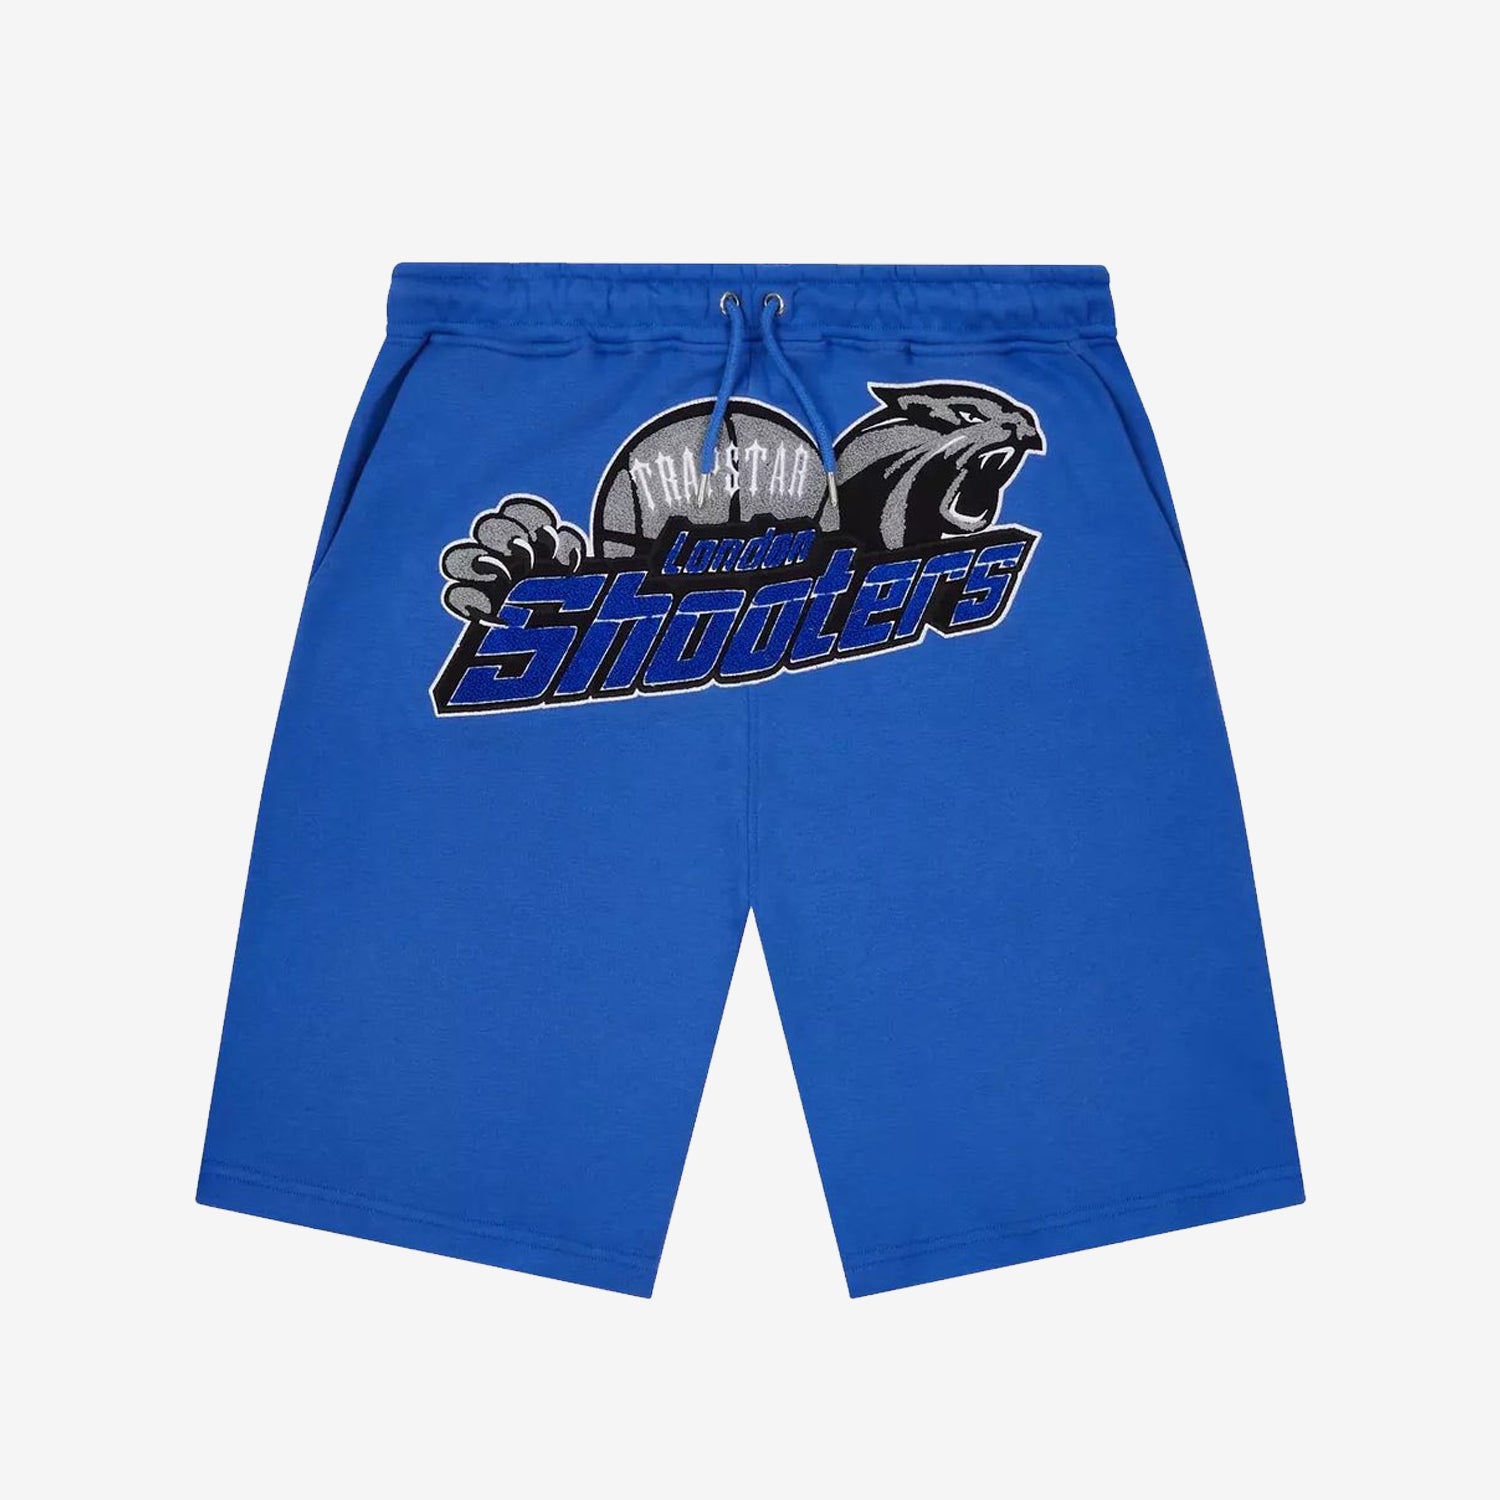 Trapstar Shooters Chenille Shorts - Blue